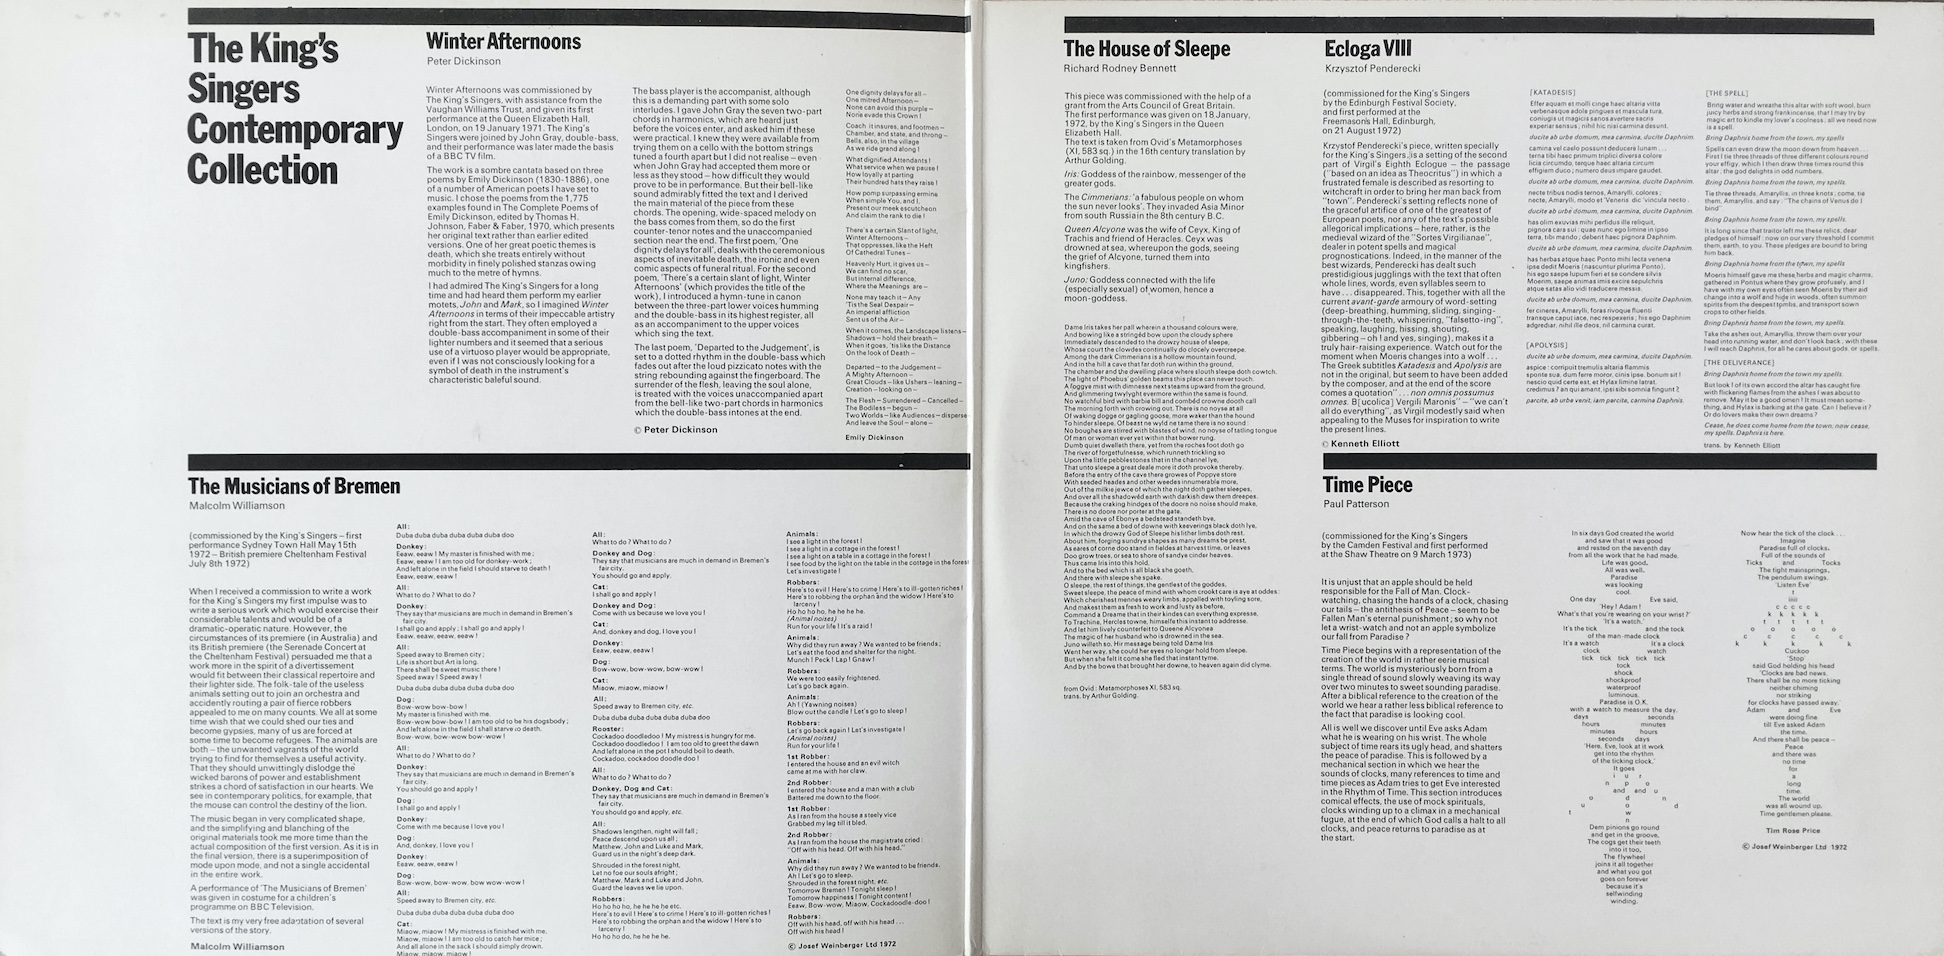 King's Singers Contemporary Collection gatefold